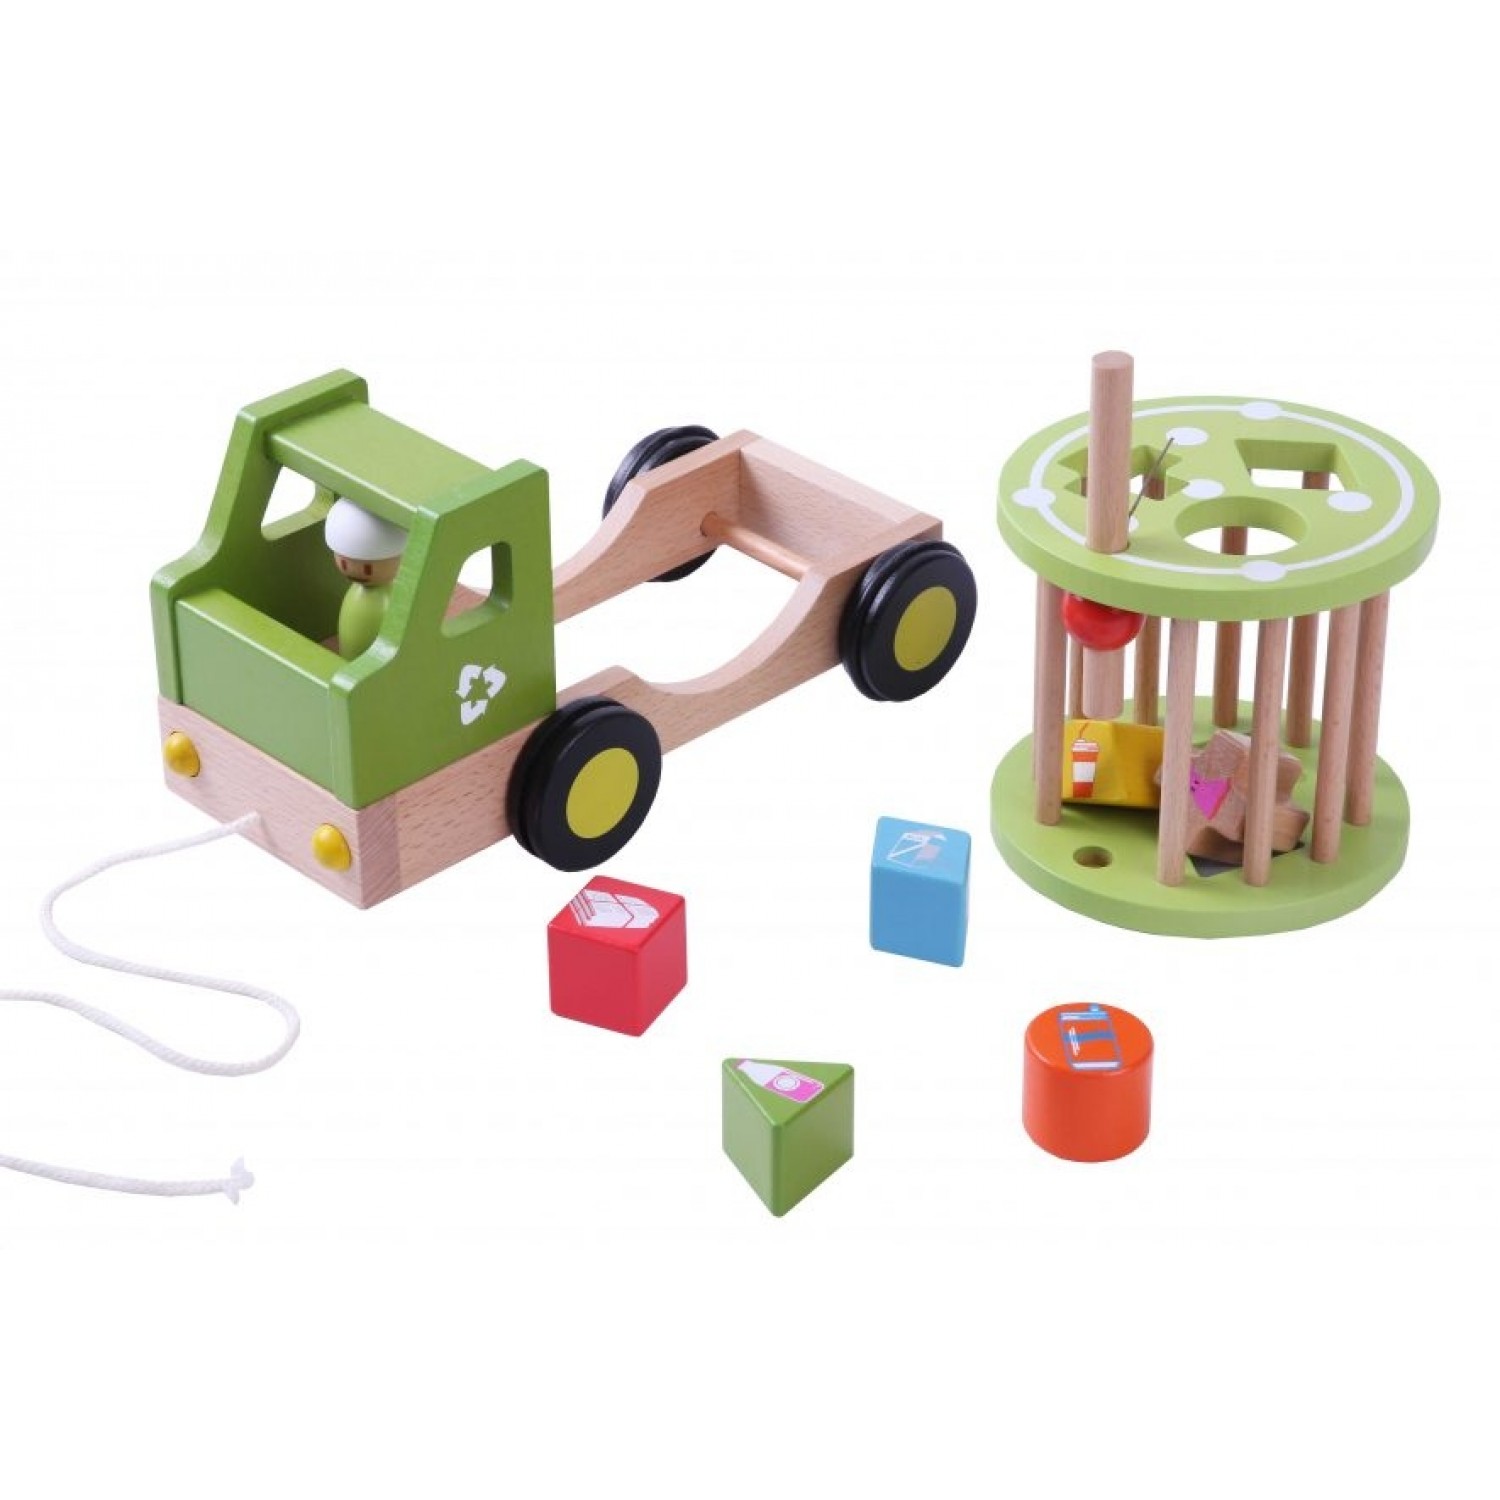 EverEarth Recycling Truck, Sorting & Pull along Toy